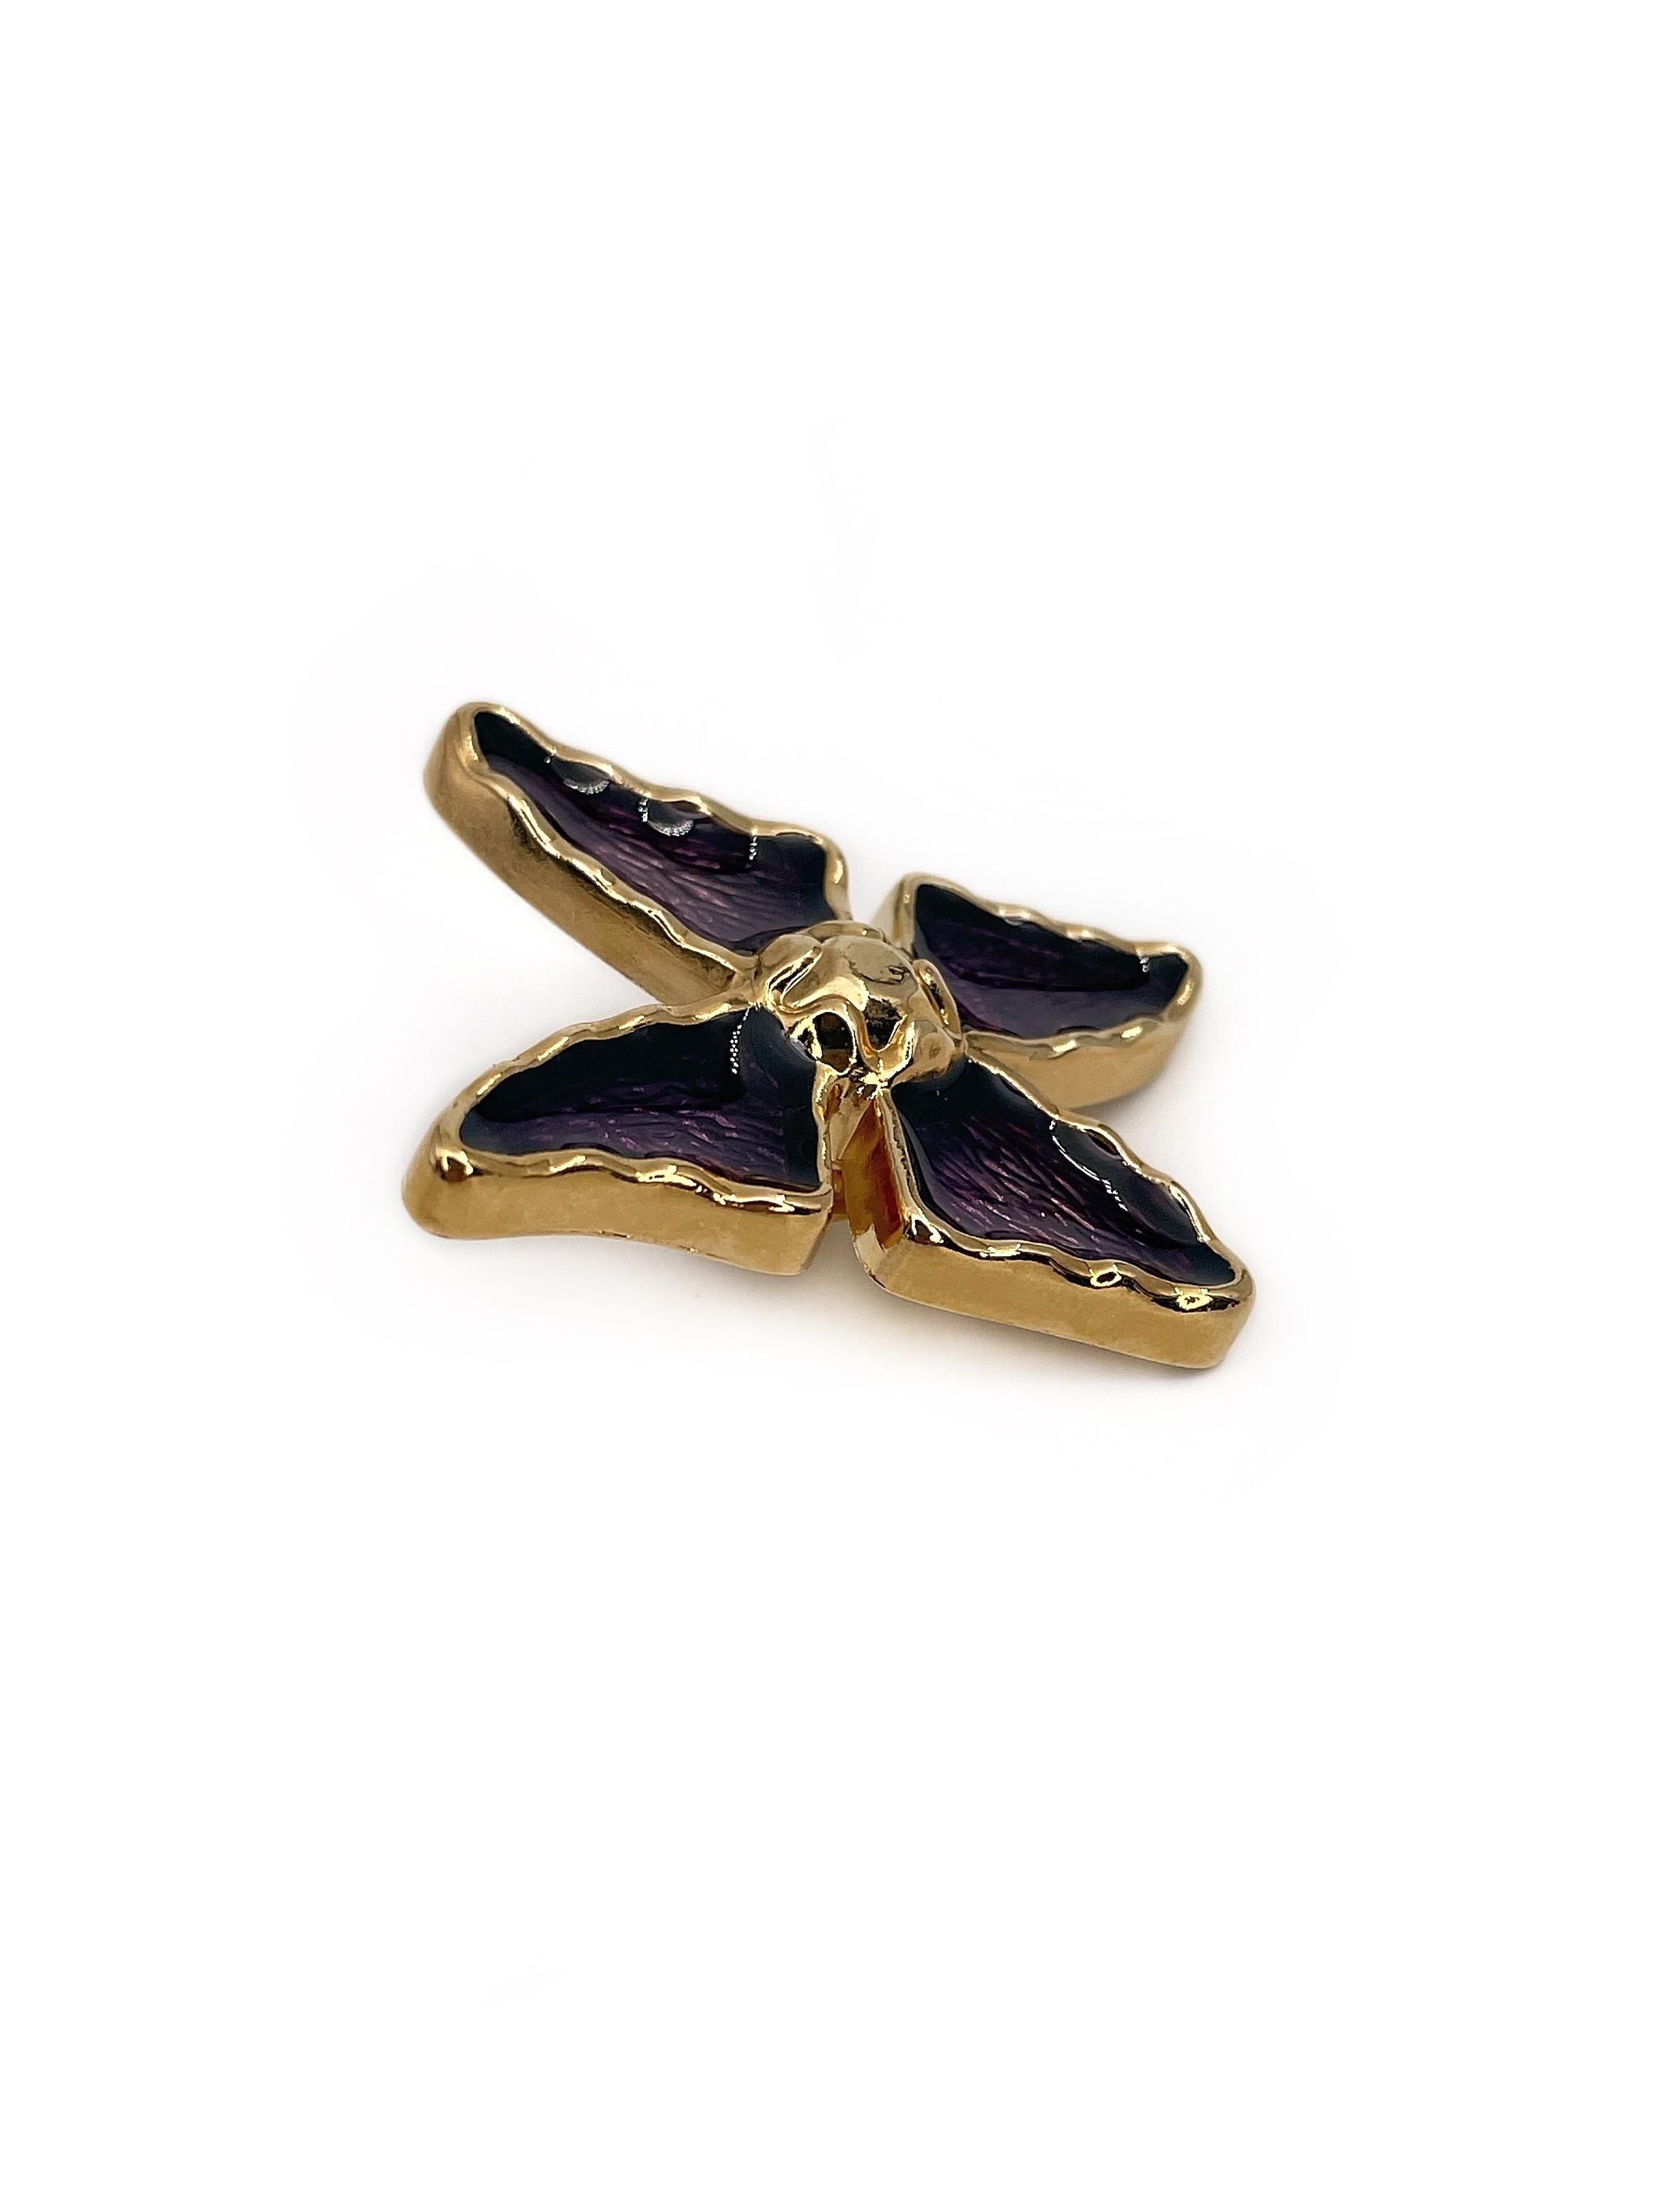 This is an iconic butterfly mini brooch pin designed by YSL in 1980’s. The piece is gold plated, adorned with purple enamel. 

Signed: “YSL - Made in France” (shown in photos).

Size: 3.3x2.7cm

———

If you have any questions, please feel free to